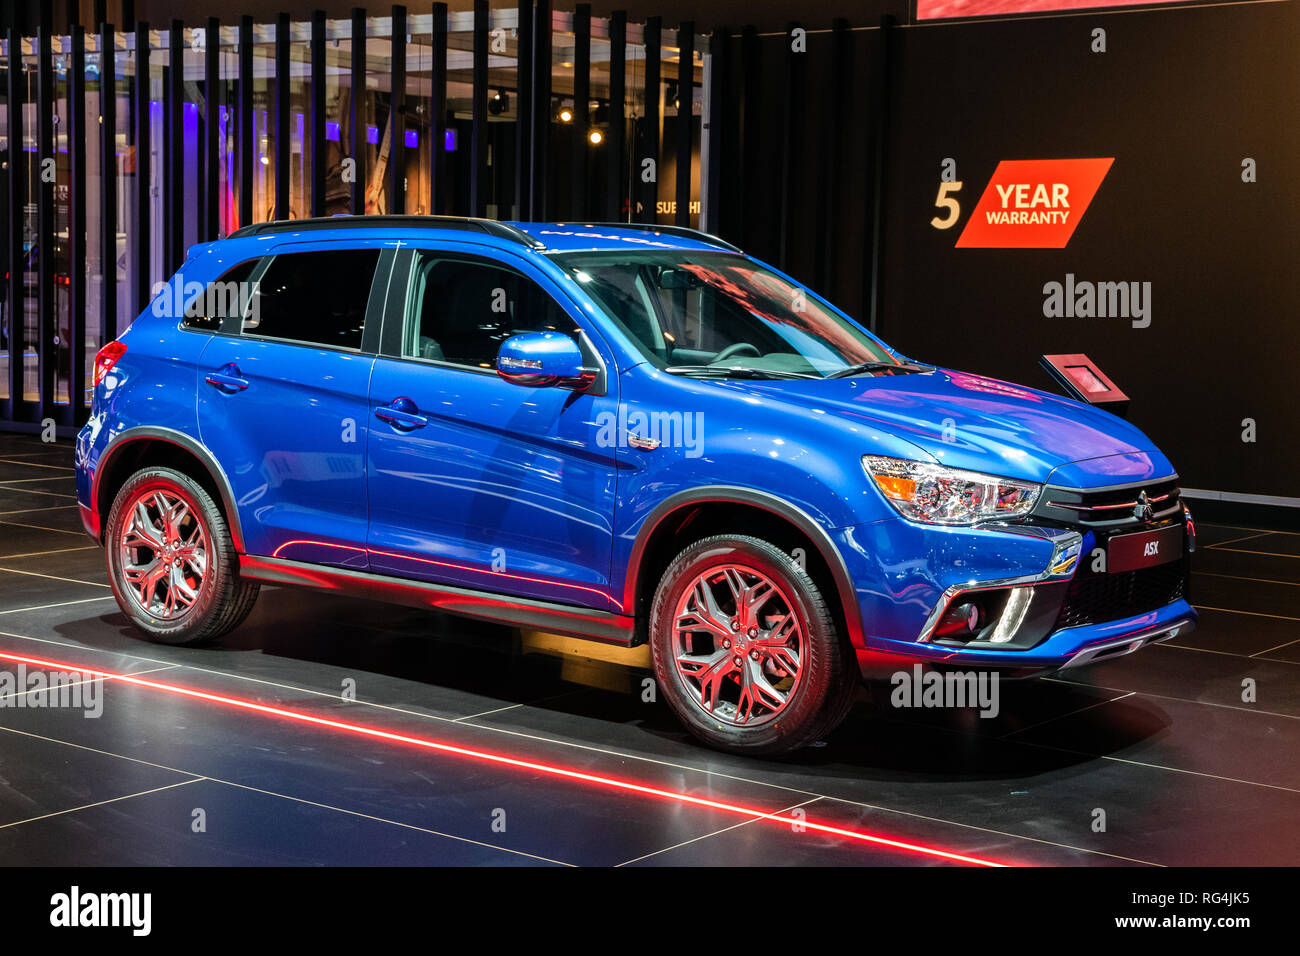 BRUSSELS - JAN 18, 2019: Mitsubishi ASX car showcased at the 97th Brussels Motor Show 2019 Autosalon. Stock Photo